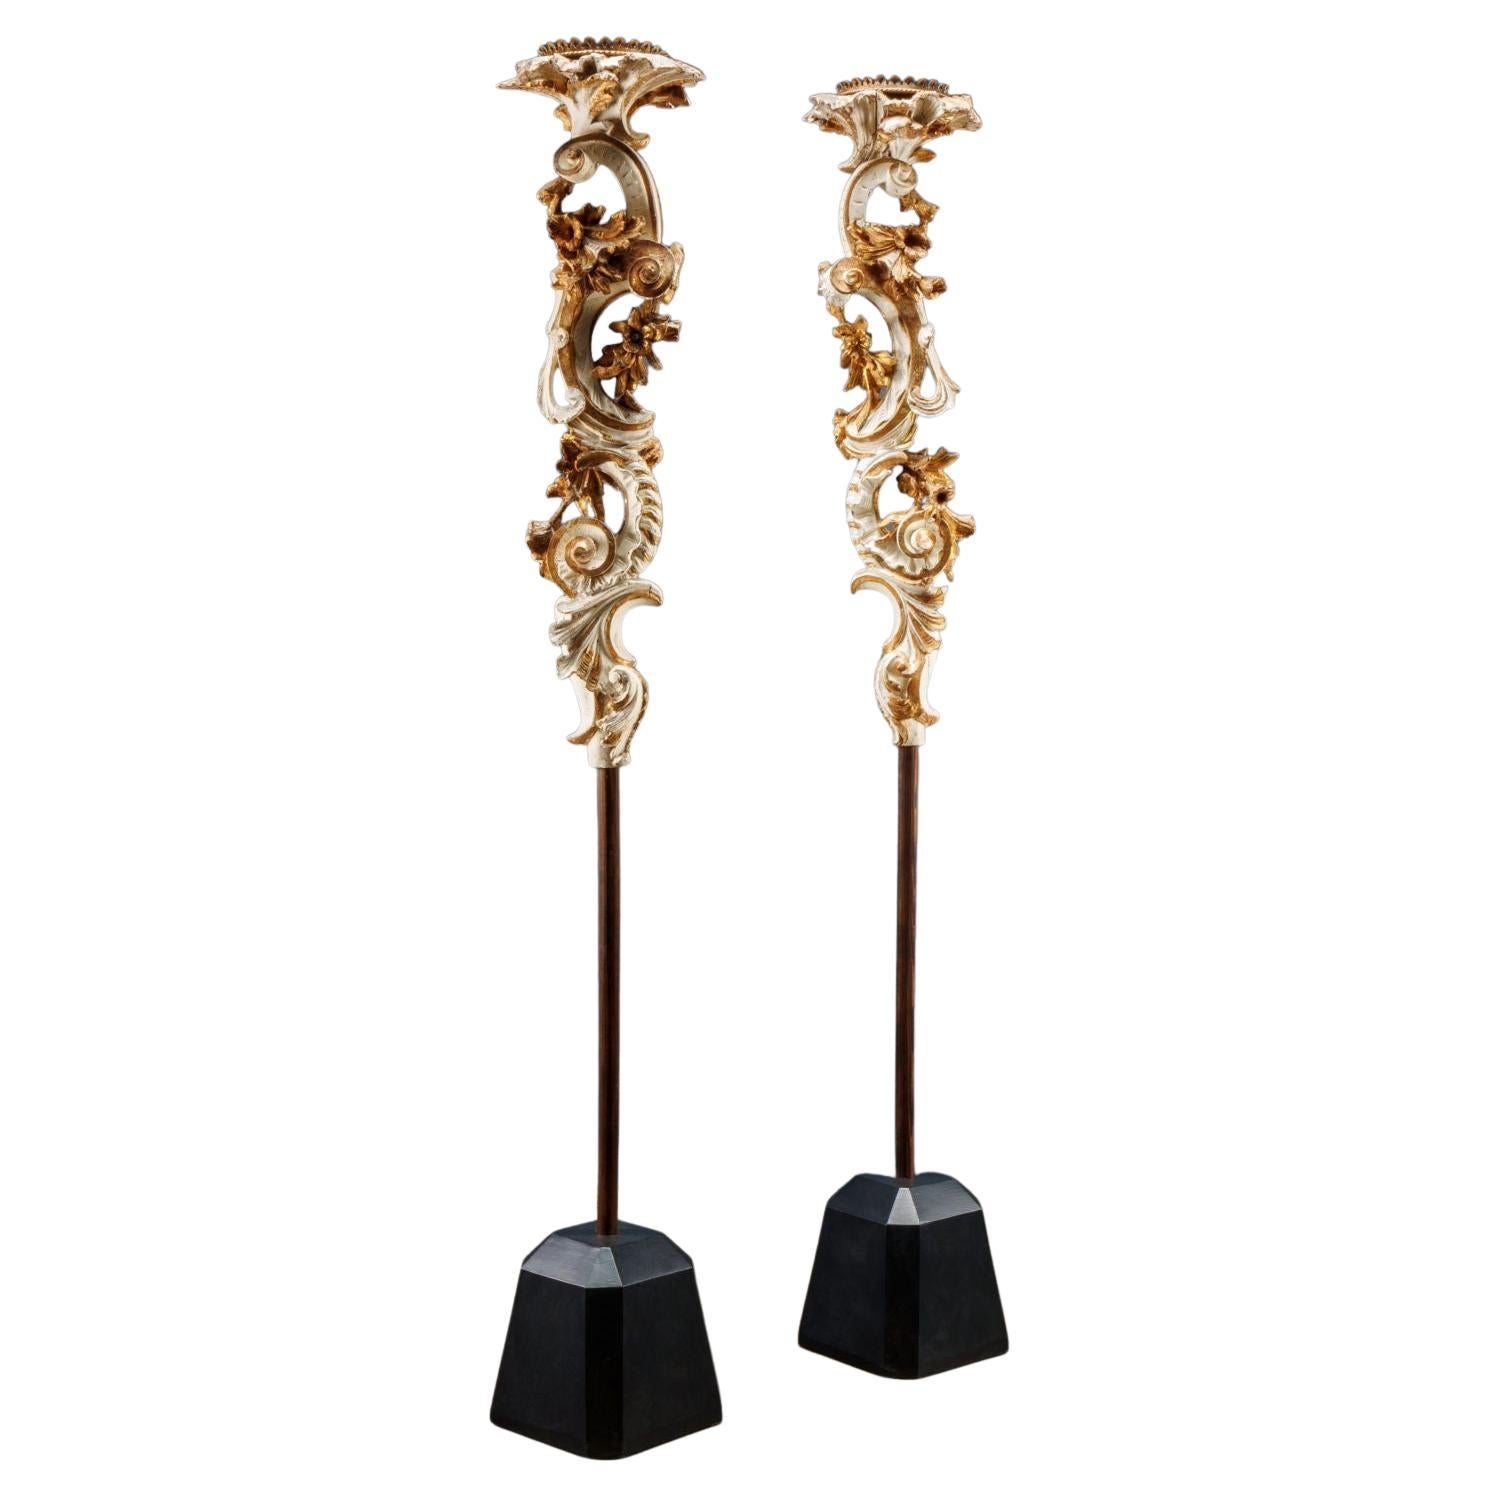 Pair of Torch Holders, Milan, 1750s For Sale